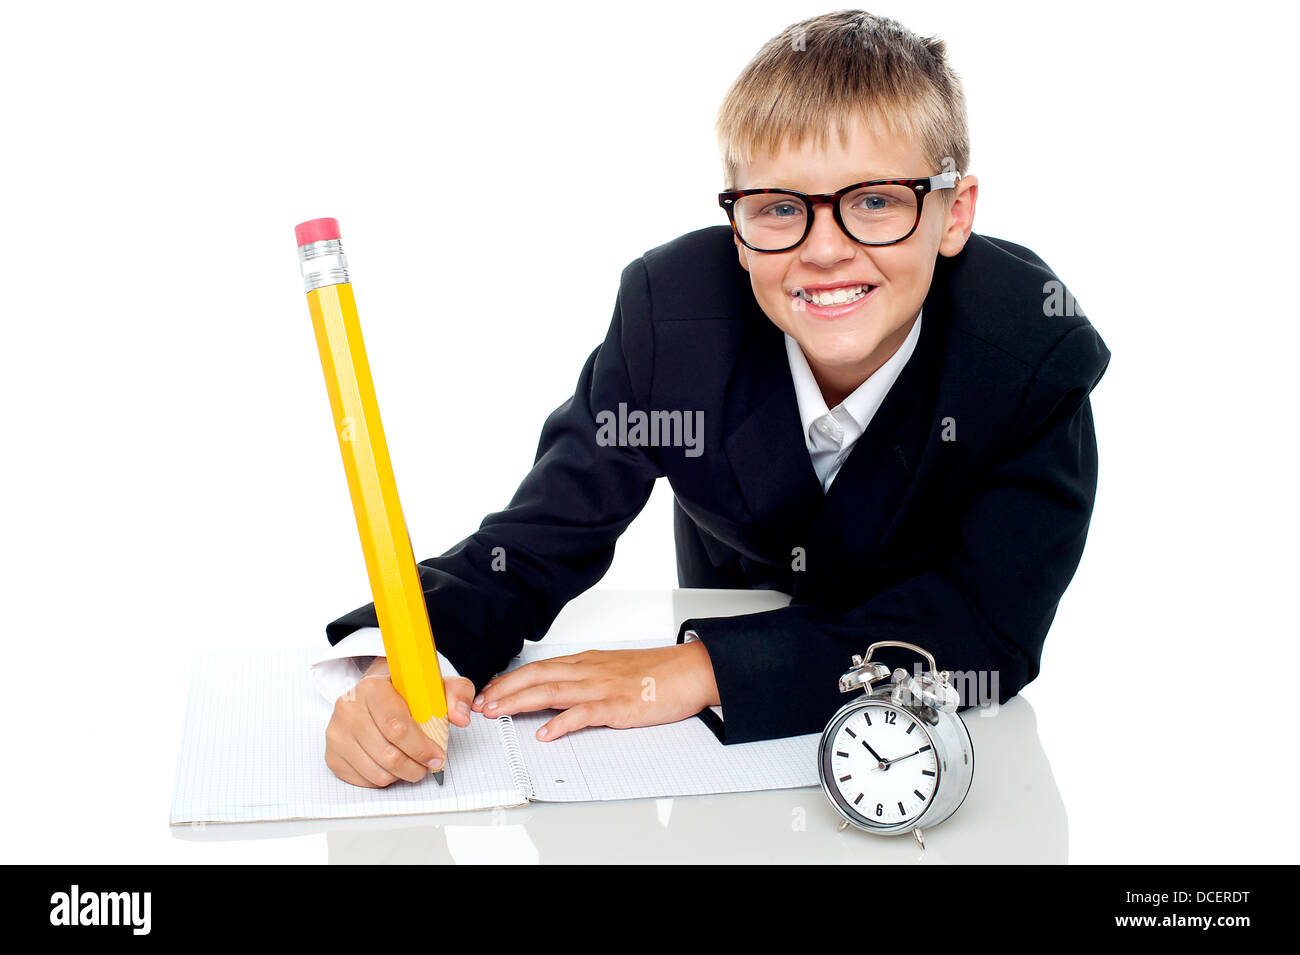 Casual shot of a school kid wearing spectacles finishing his assignment in time Stock Photo